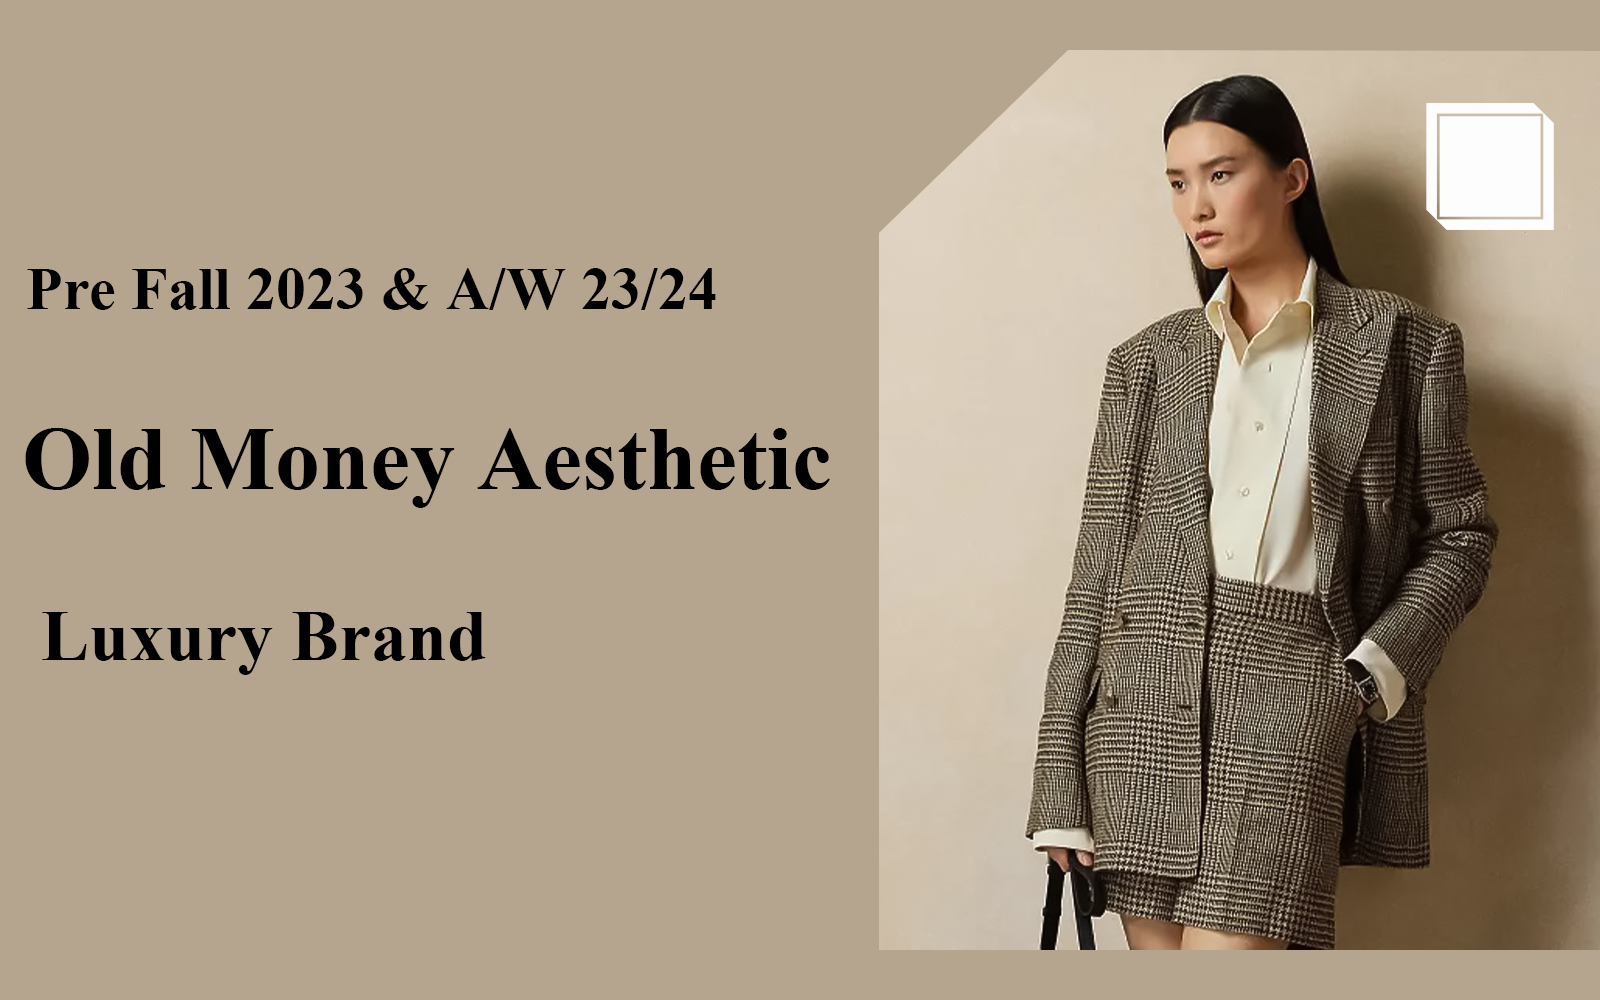 Old Money -- The Comprehensive Analysis of Luxury Brand